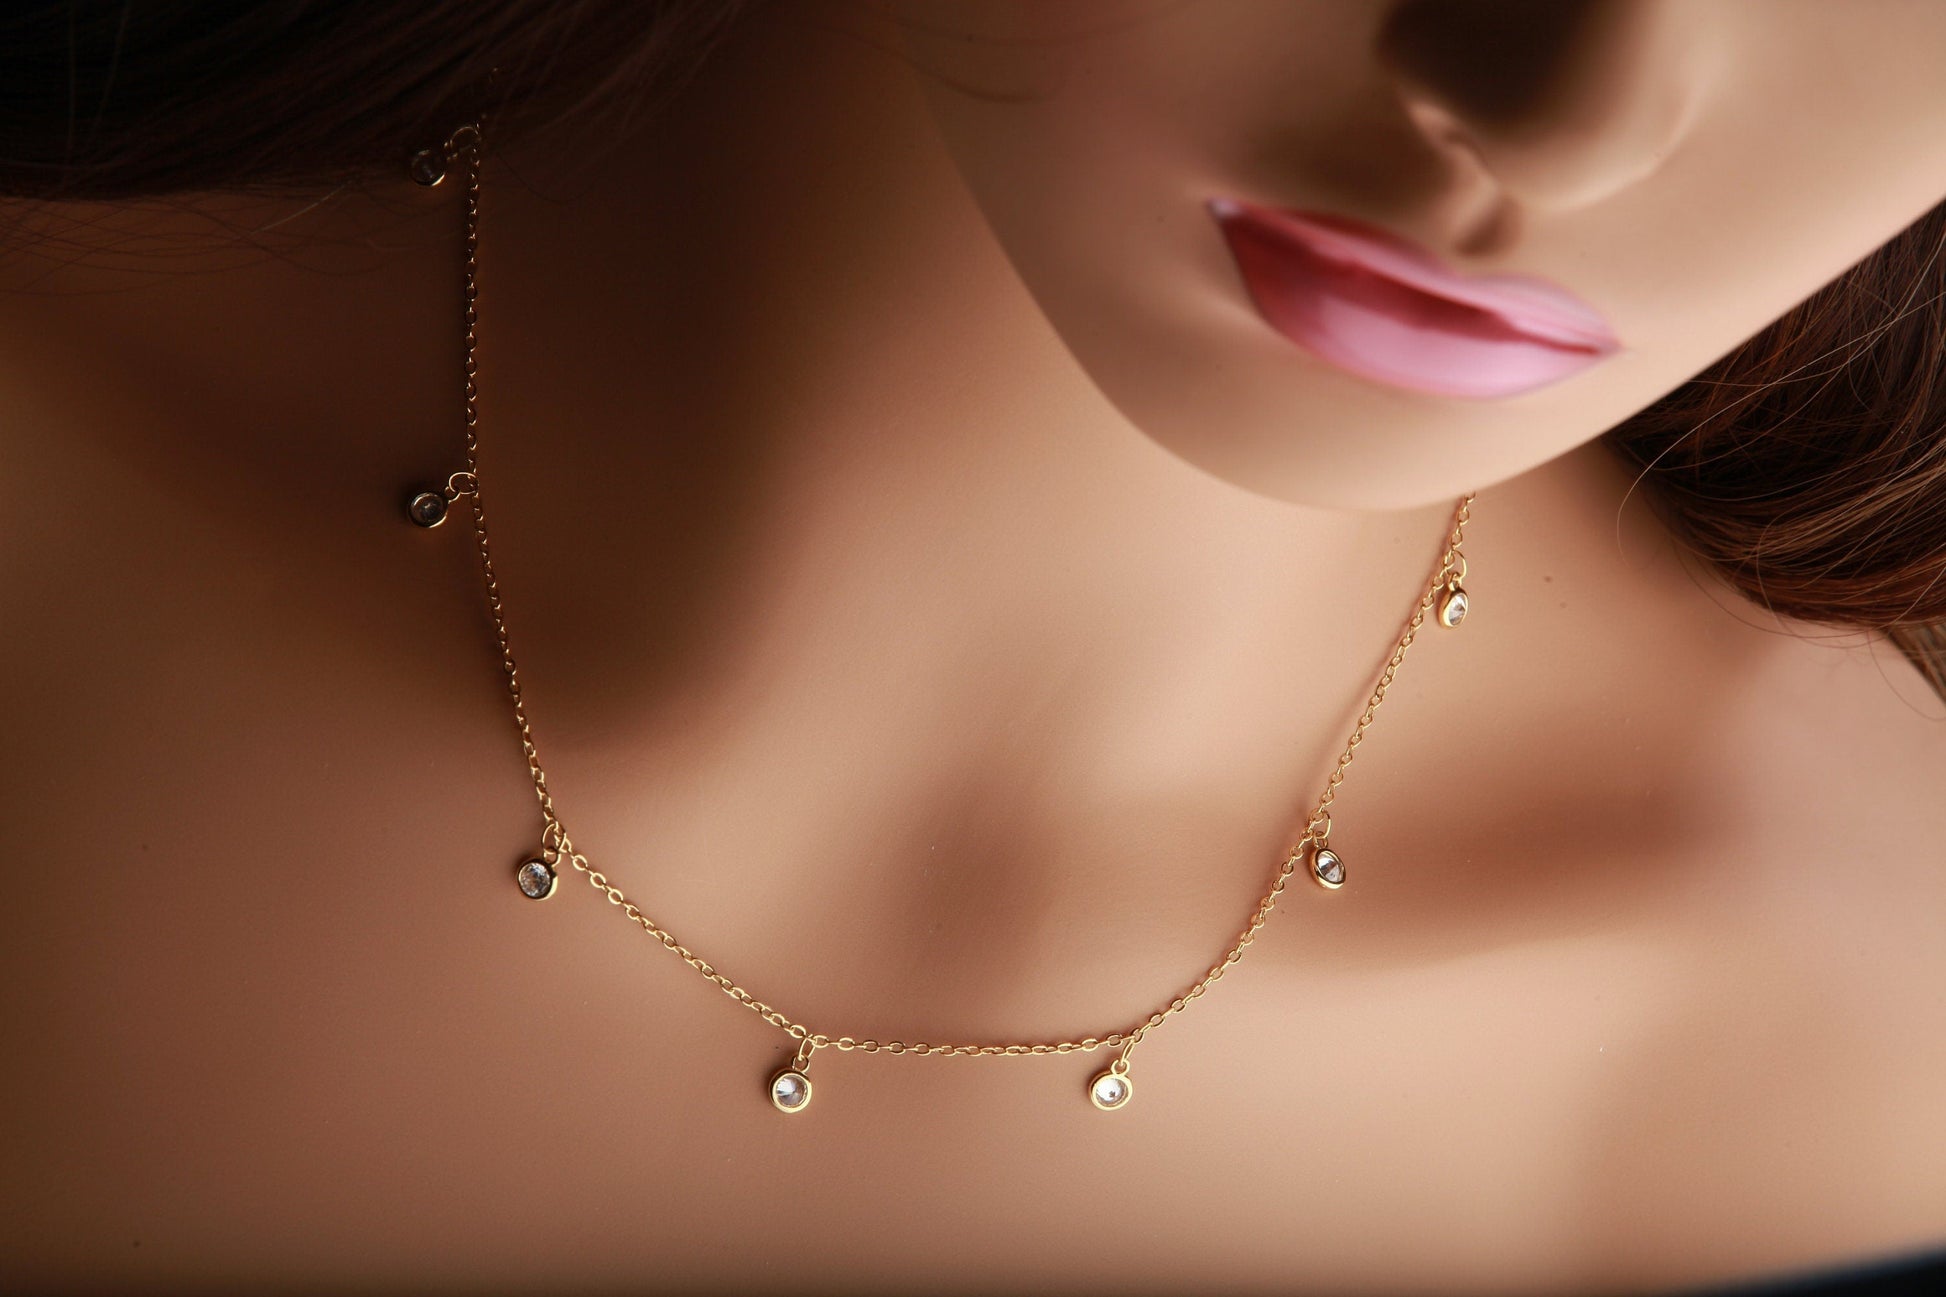 Cubic Zirconia CZ diamond Bezel Dangling Charm Gold Filled Choker Necklace. Gift for her. Available in sizes